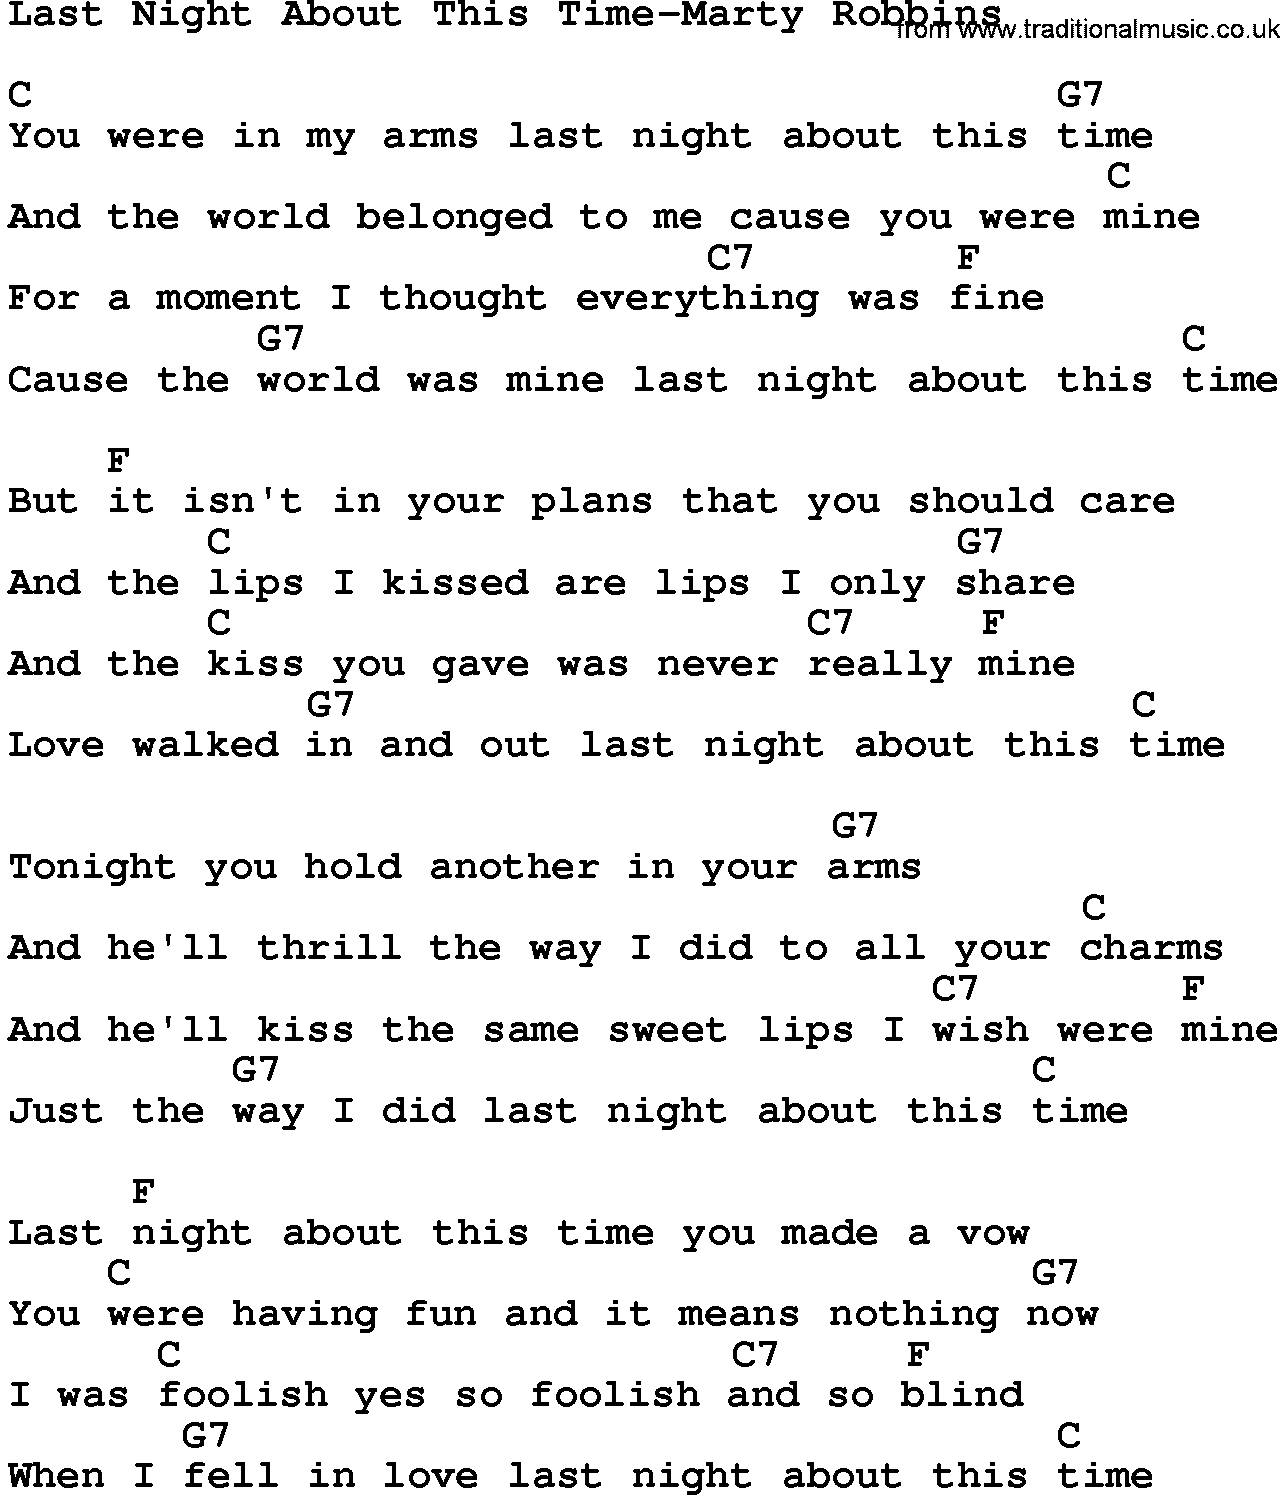 Country music song: Last Night About This Time-Marty Robbins lyrics and chords